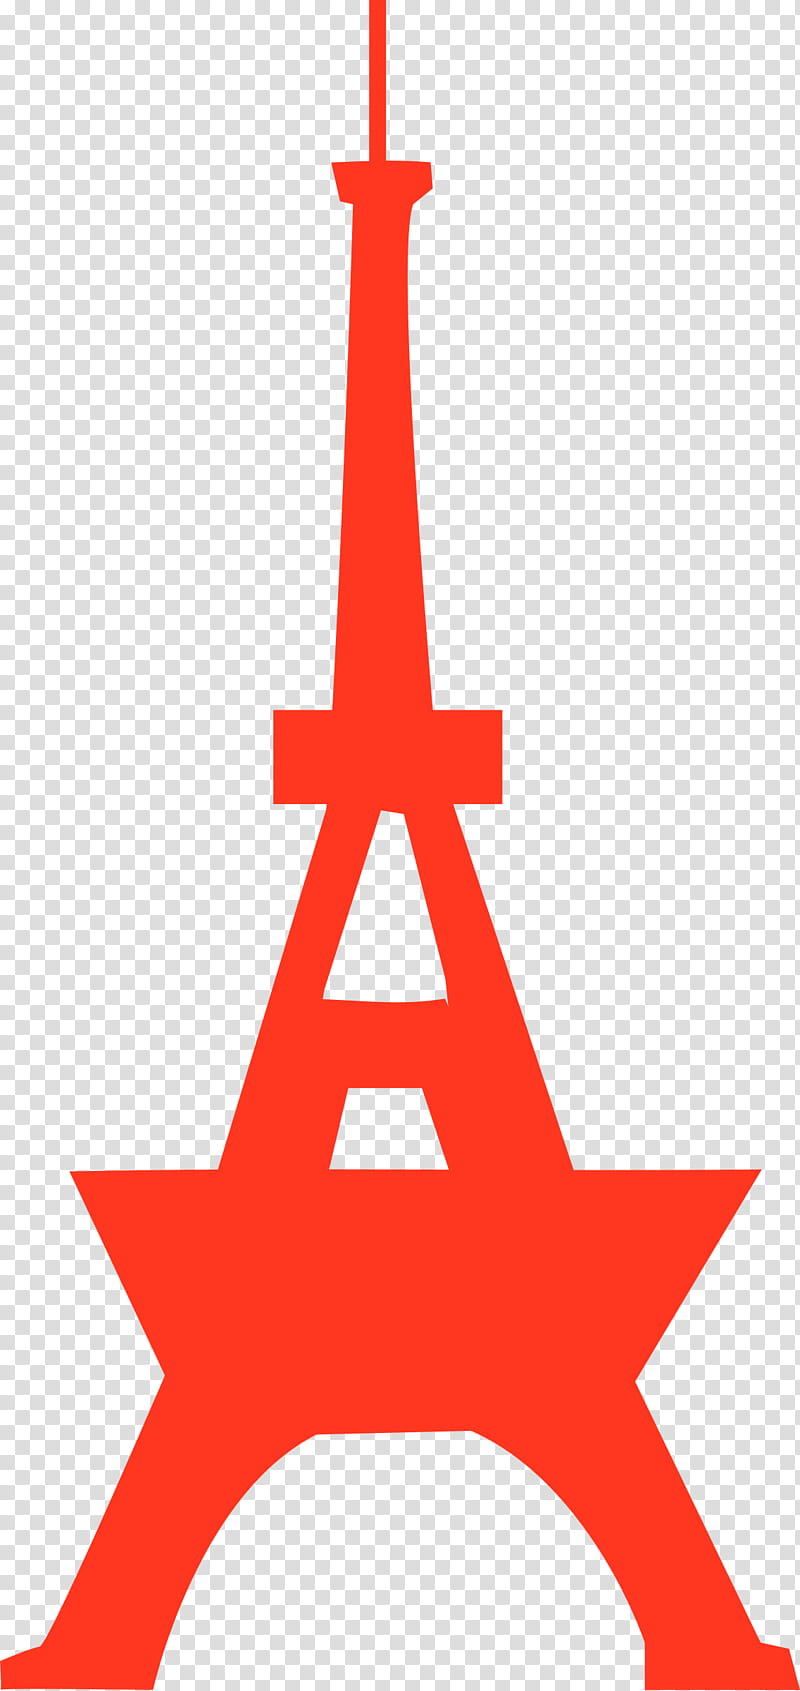 Japan, Tokyo Tower, Eiffel Tower, Building, Monument, Red, Line, Angle transparent background PNG clipart